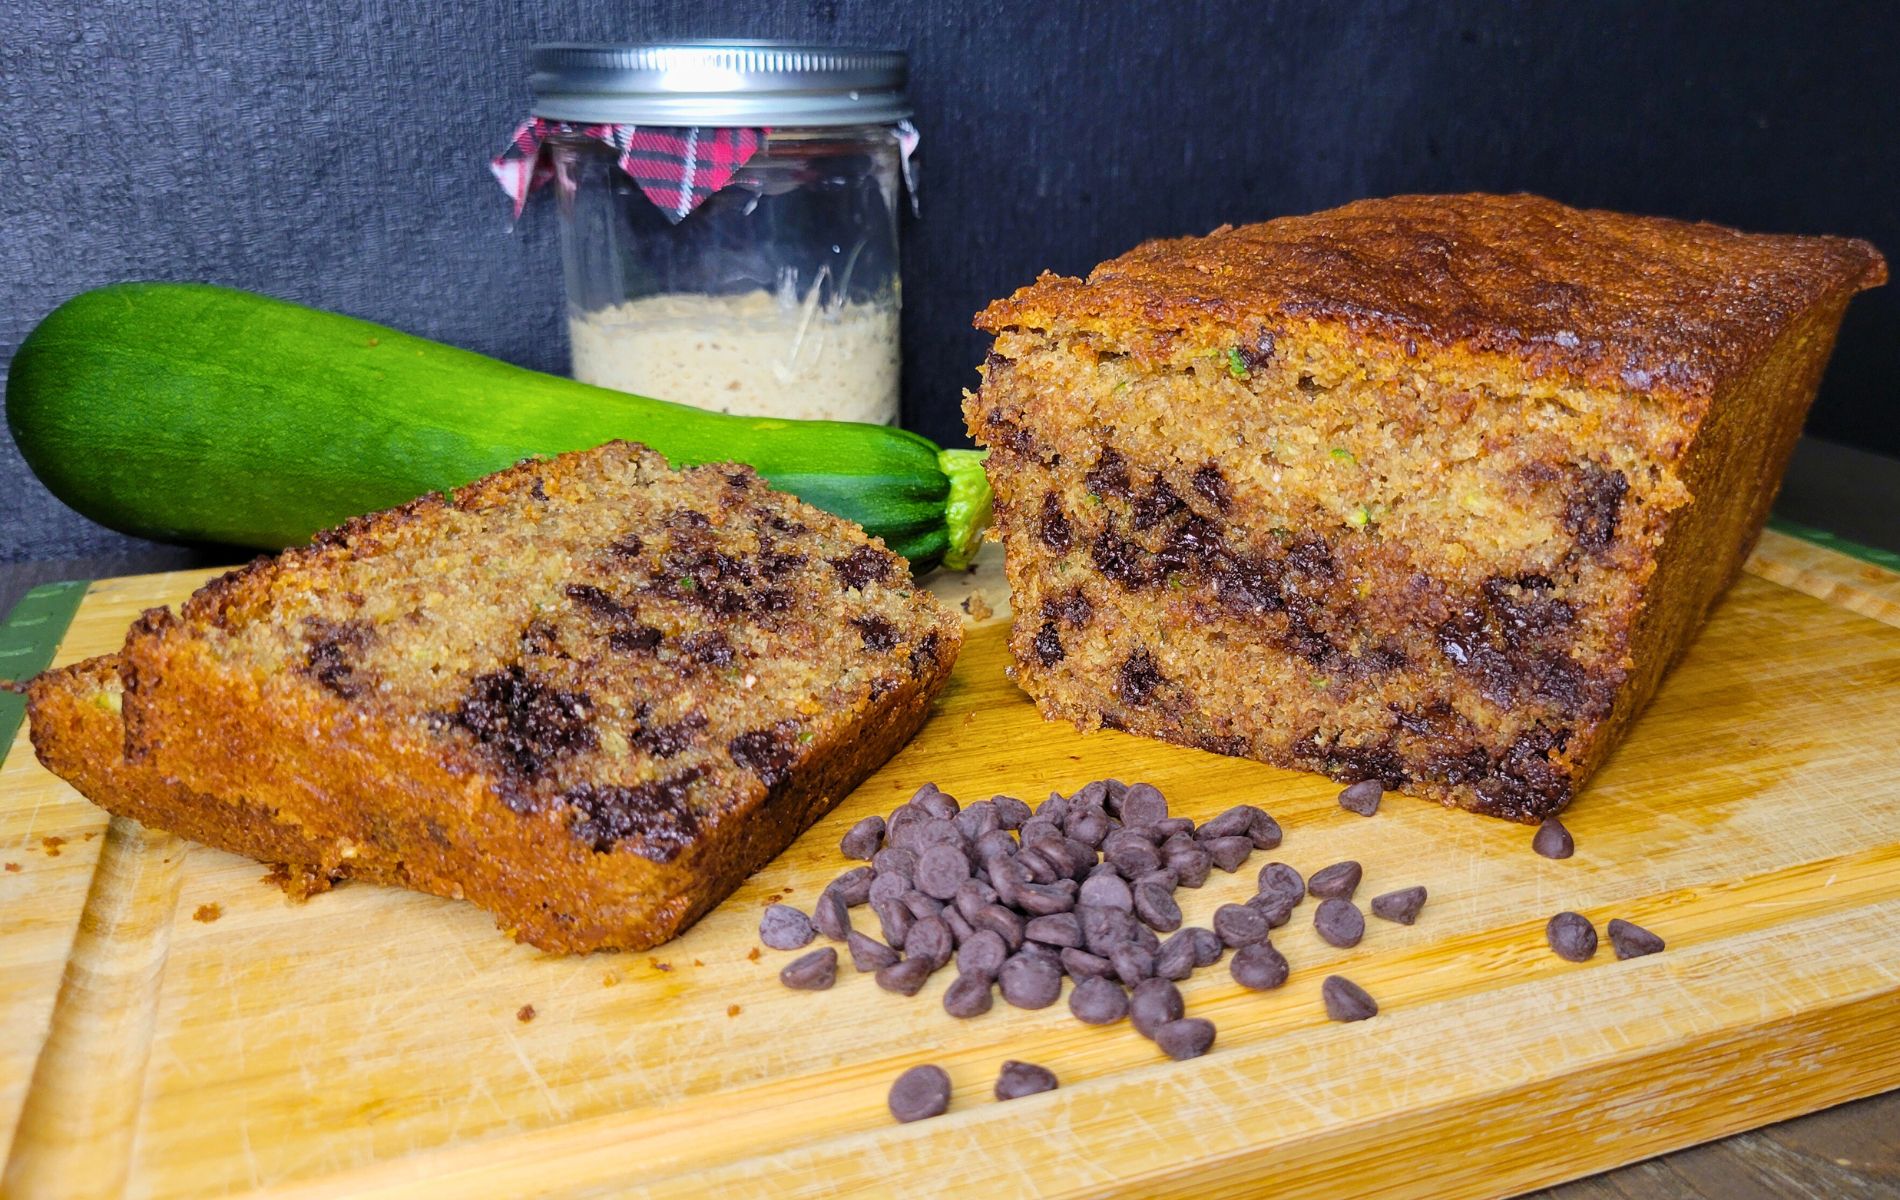 Chocolate Chip Sourdough zucchini bread made with fresh milled flour